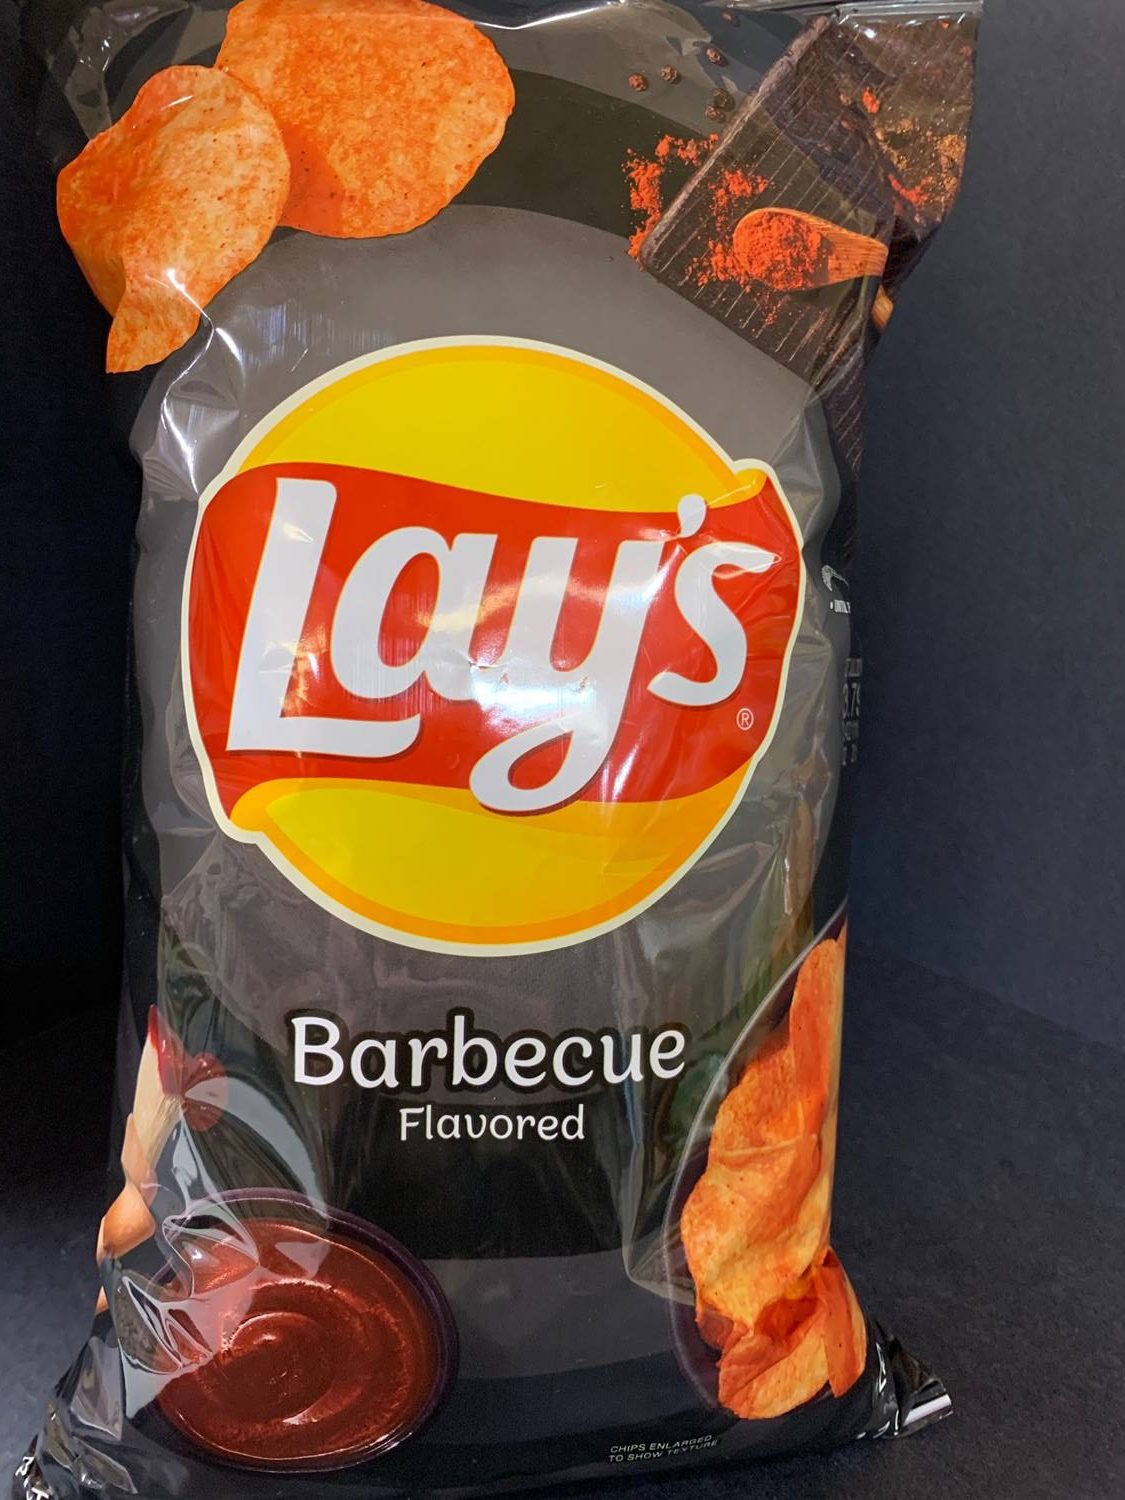 Lay's Barbecue chips